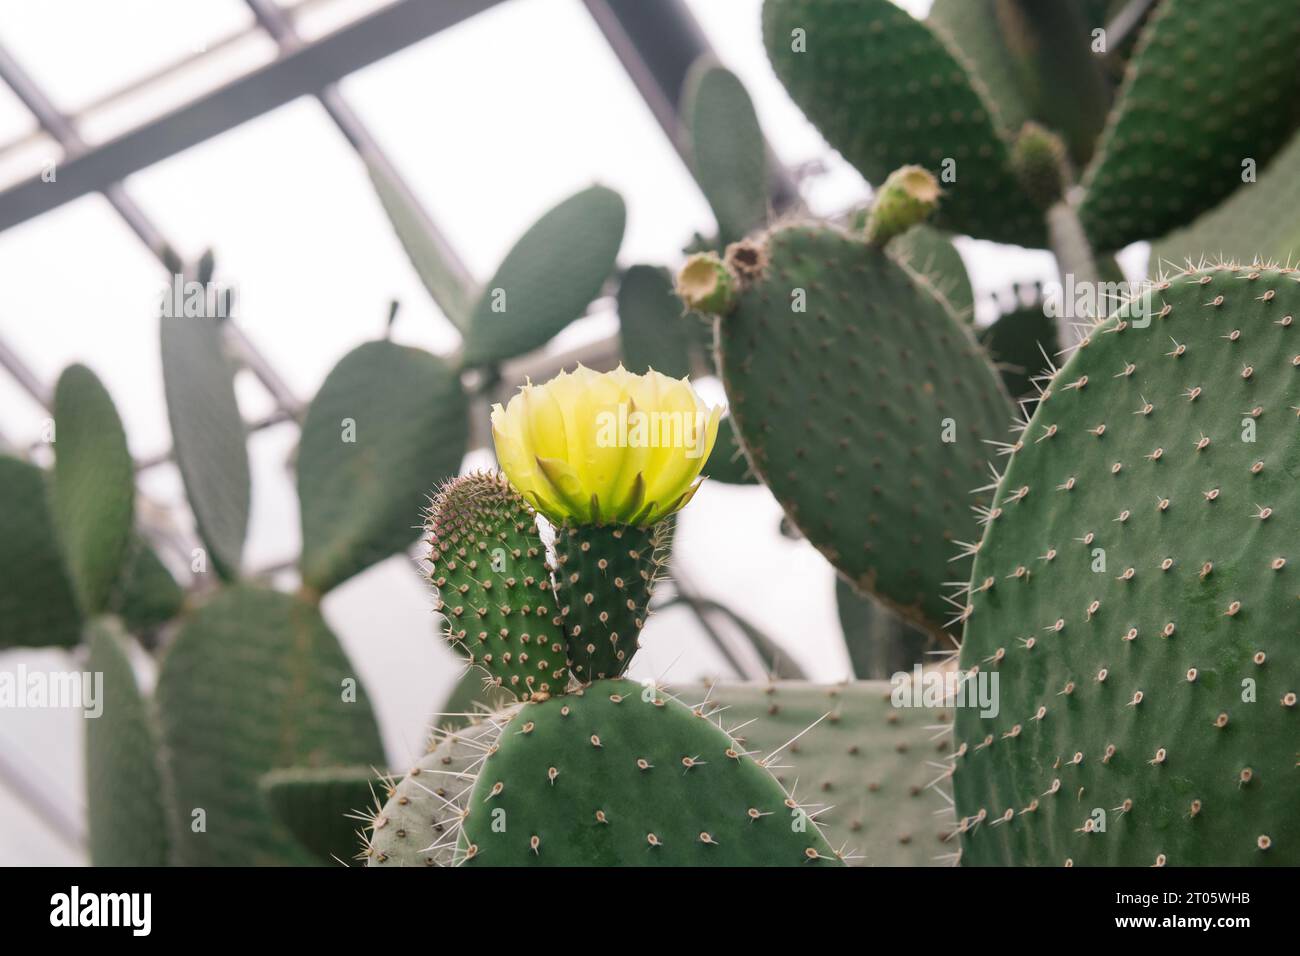 young prickly pear cactus leaves with yellow flower Stock Photo